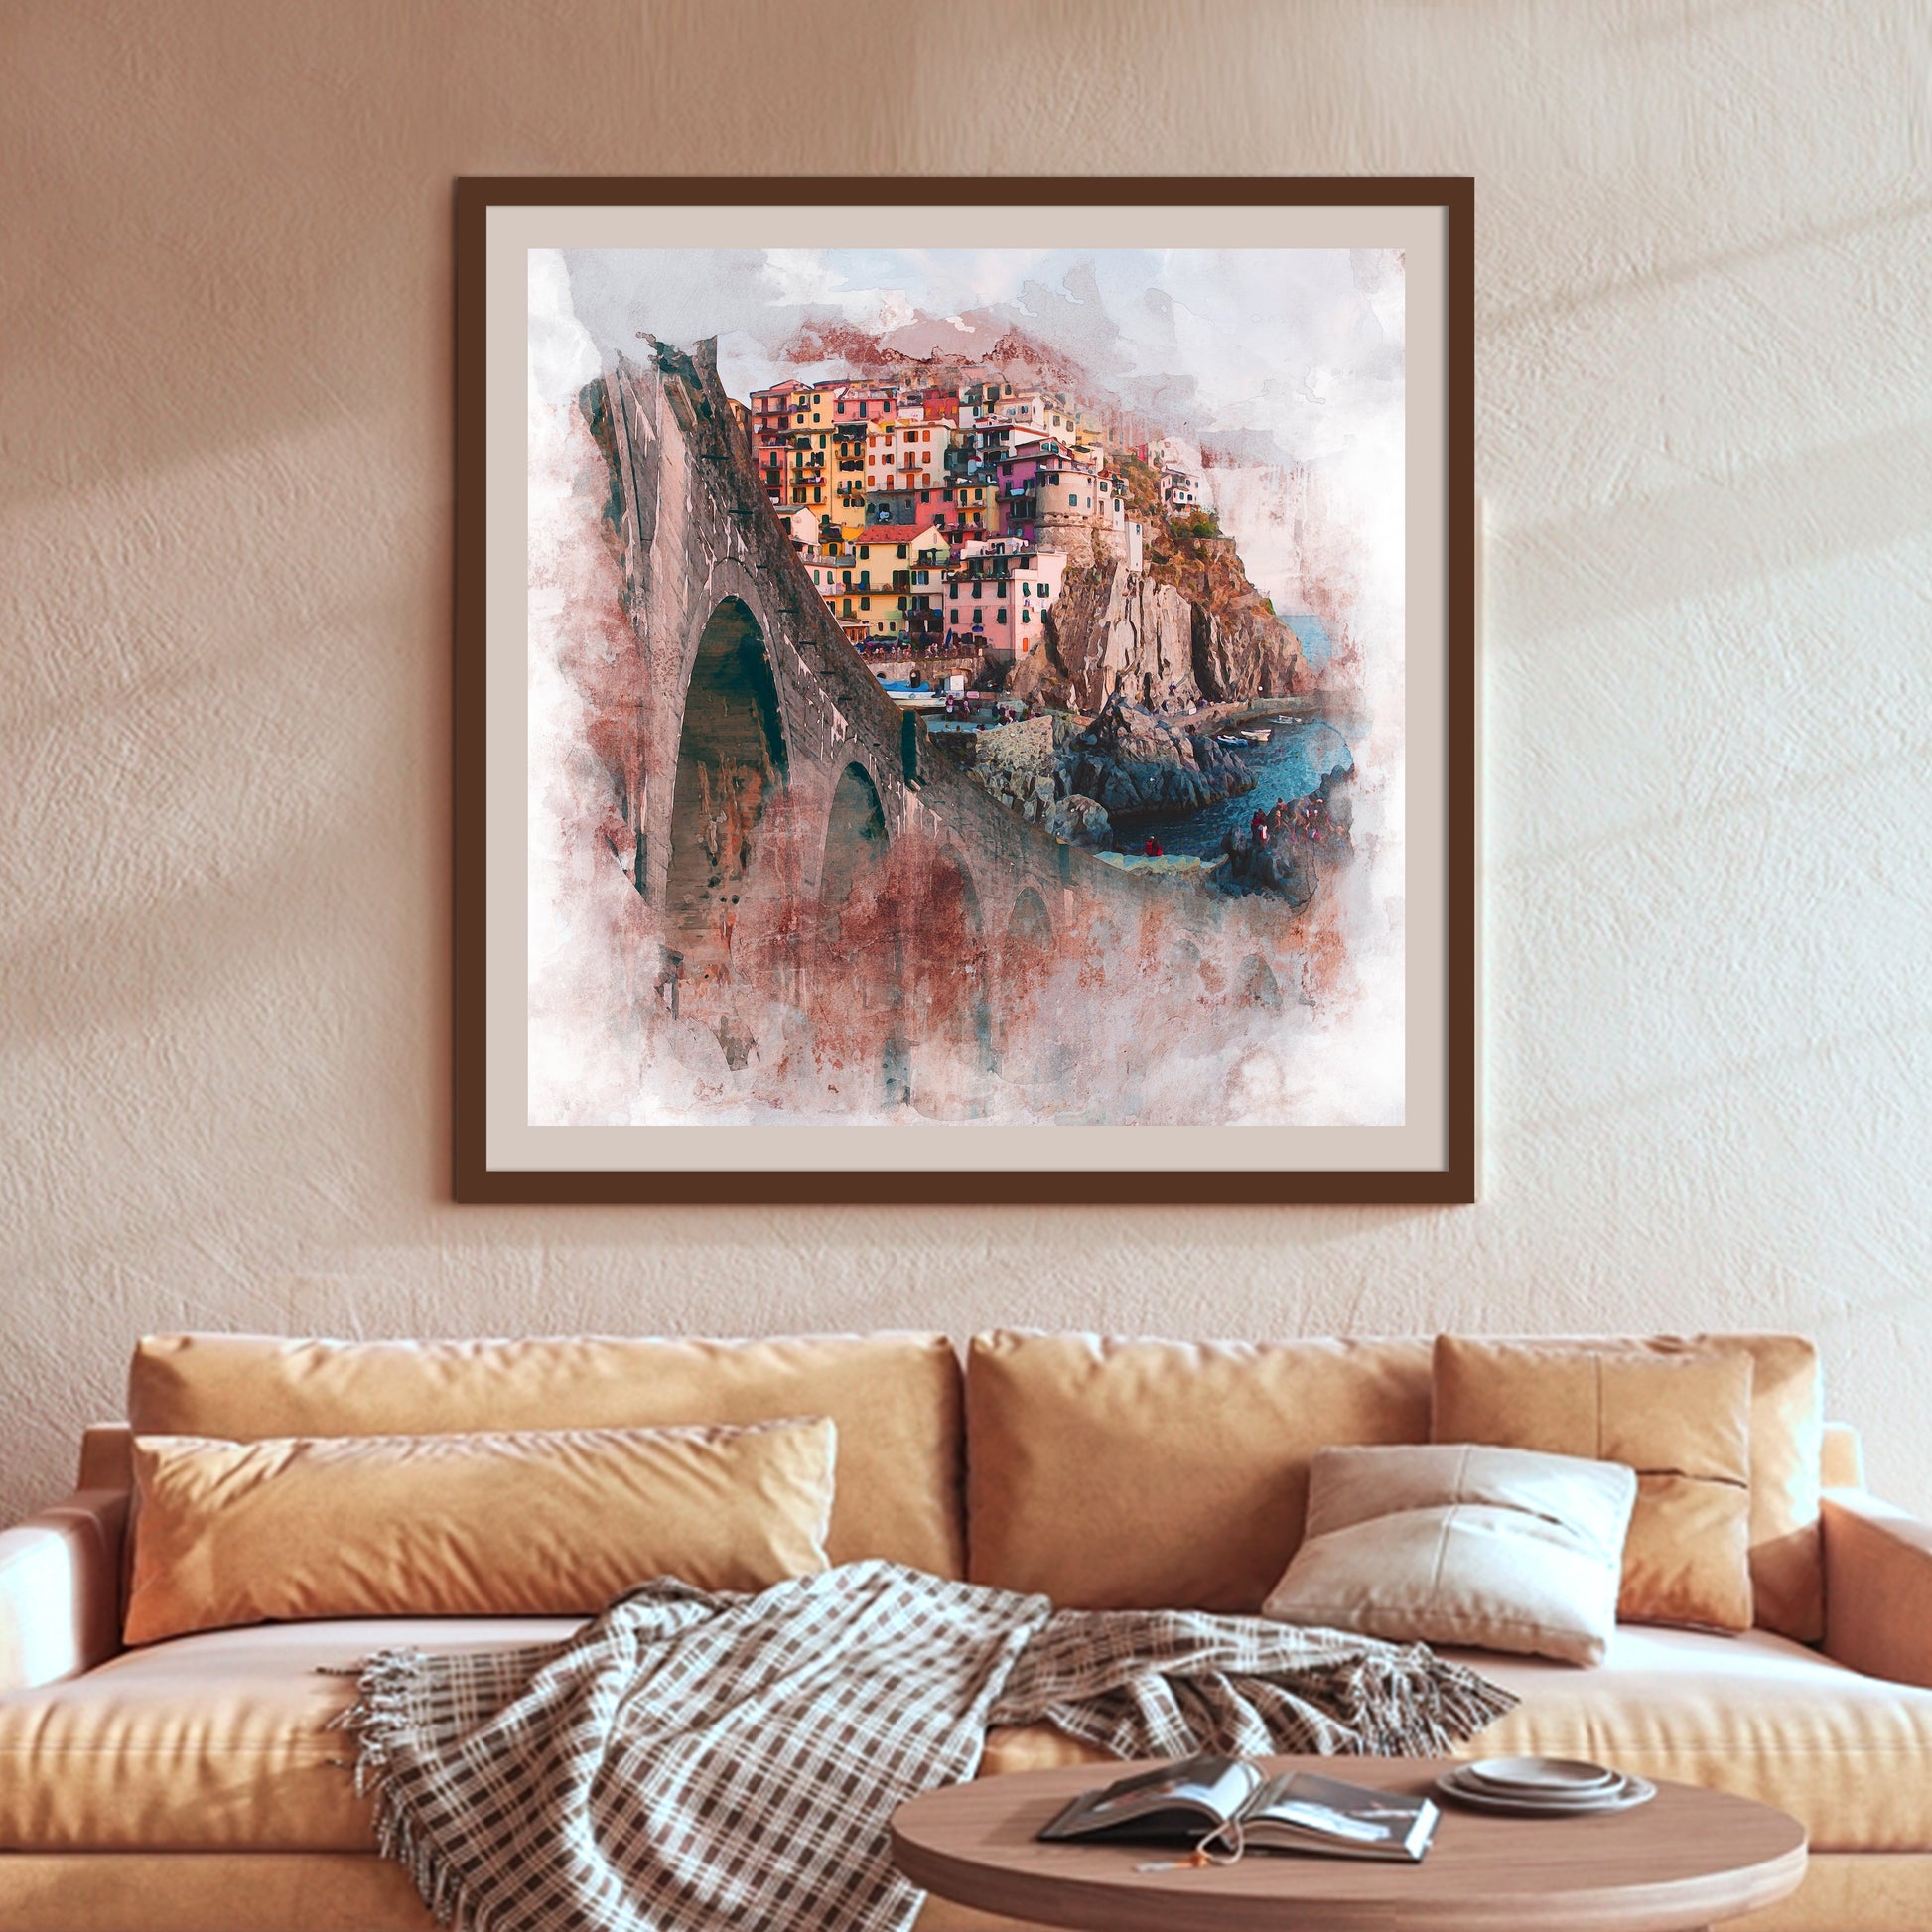 Acrylic print showcasing the beauty of aging in wall decor.